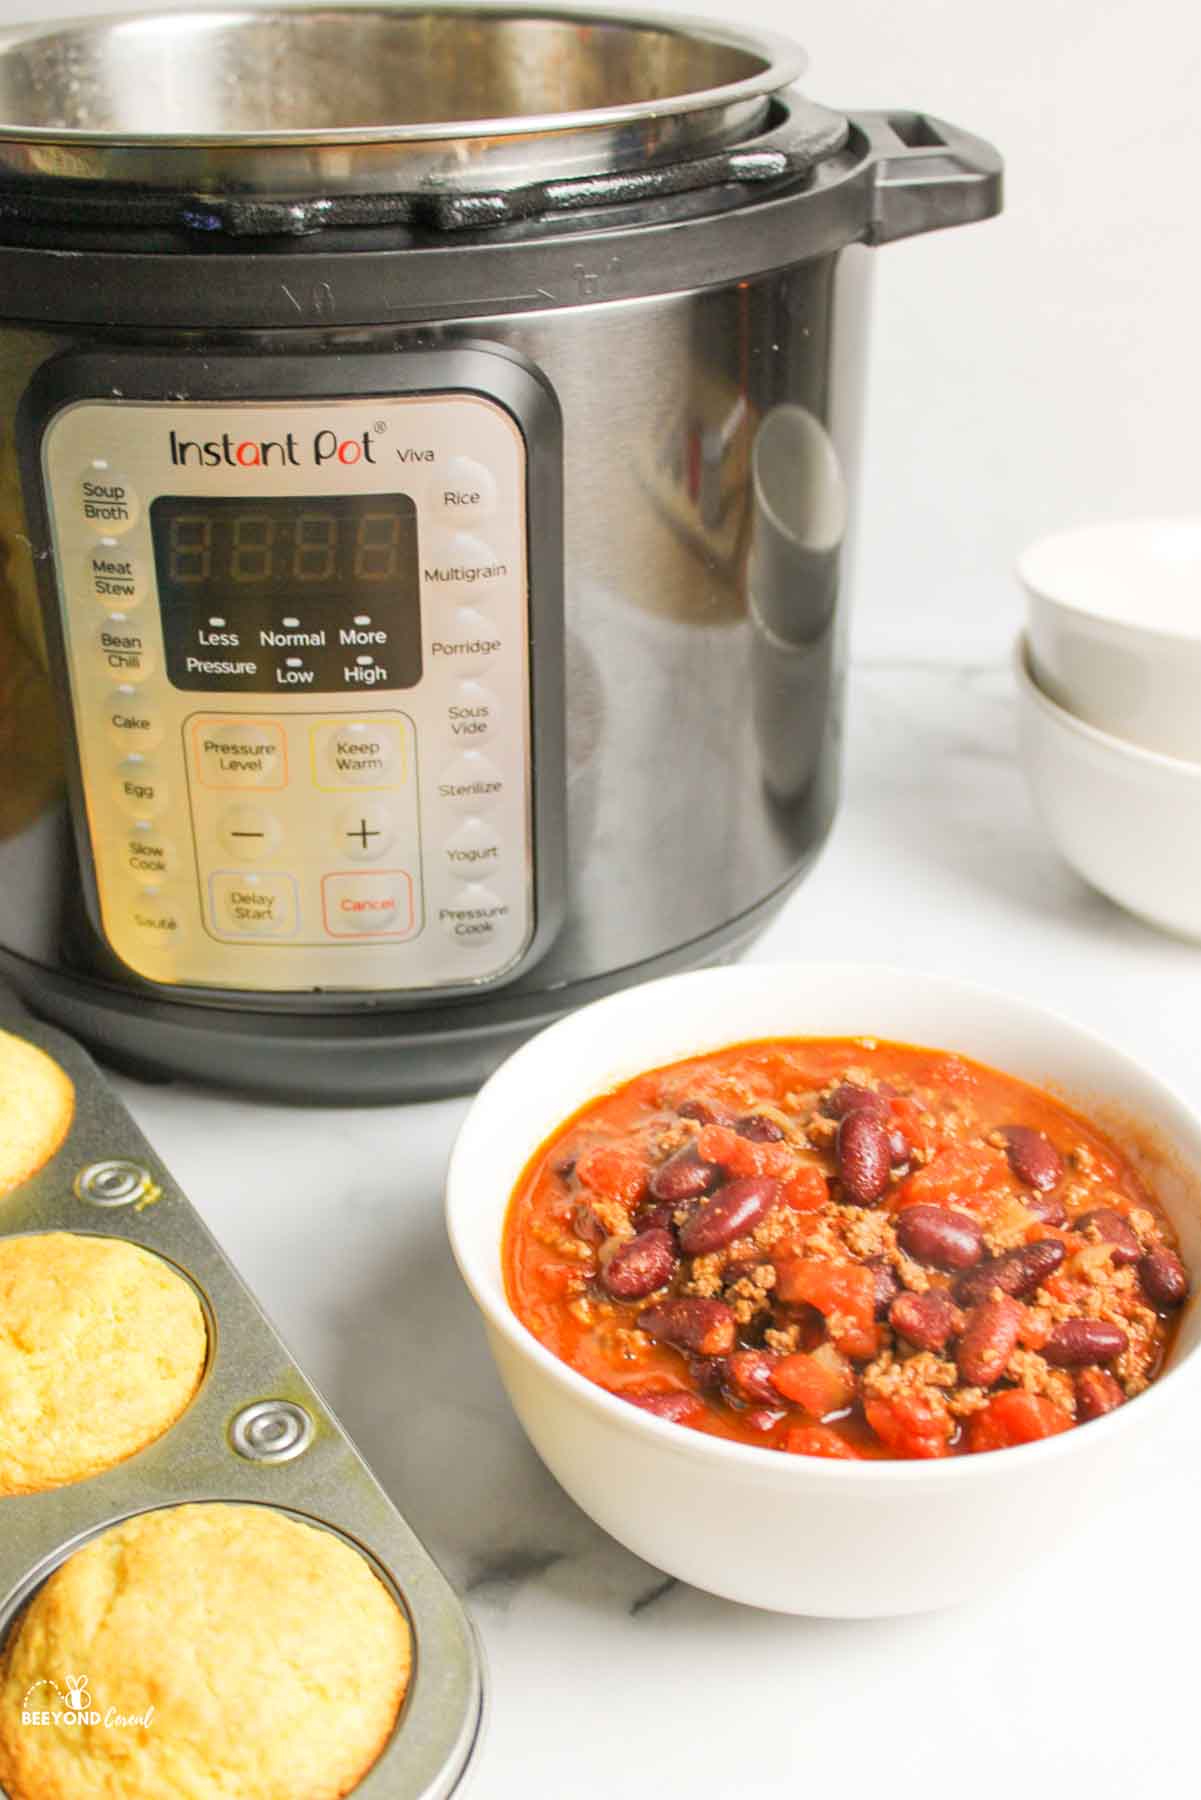 chili in a bowl in front of instant pot and next to tray of cornbread muffins